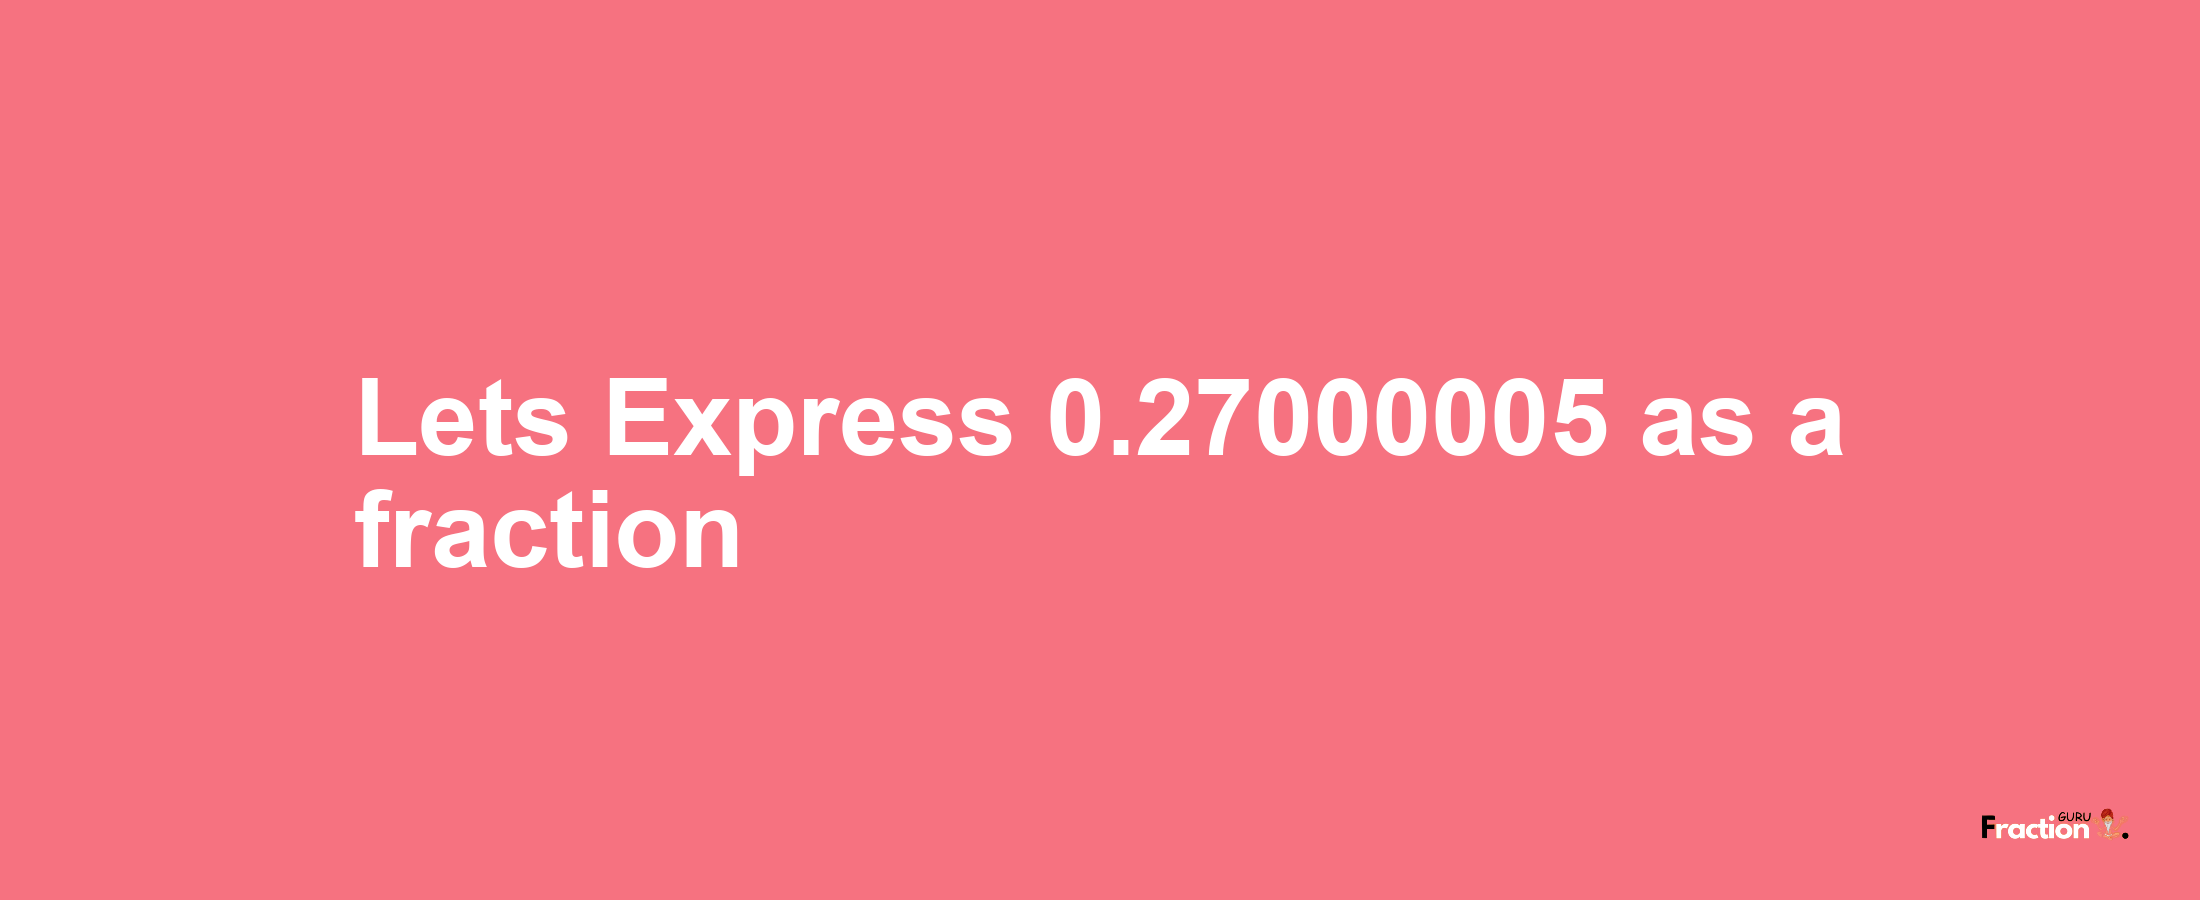 Lets Express 0.27000005 as afraction